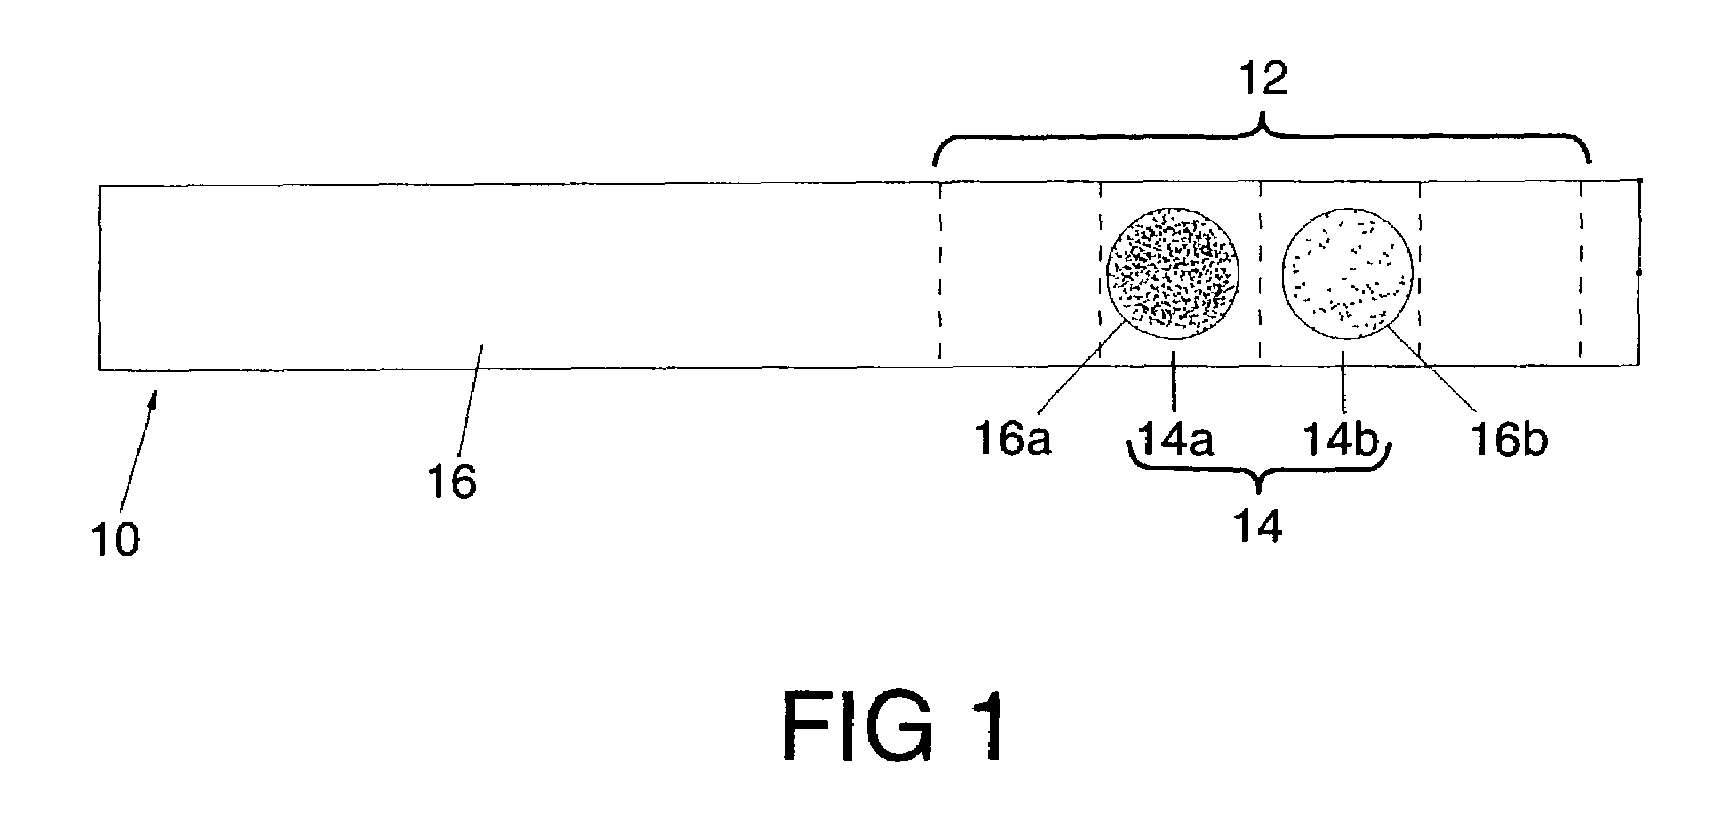 Method for selectively combining multiple membranes for assembly into test strips